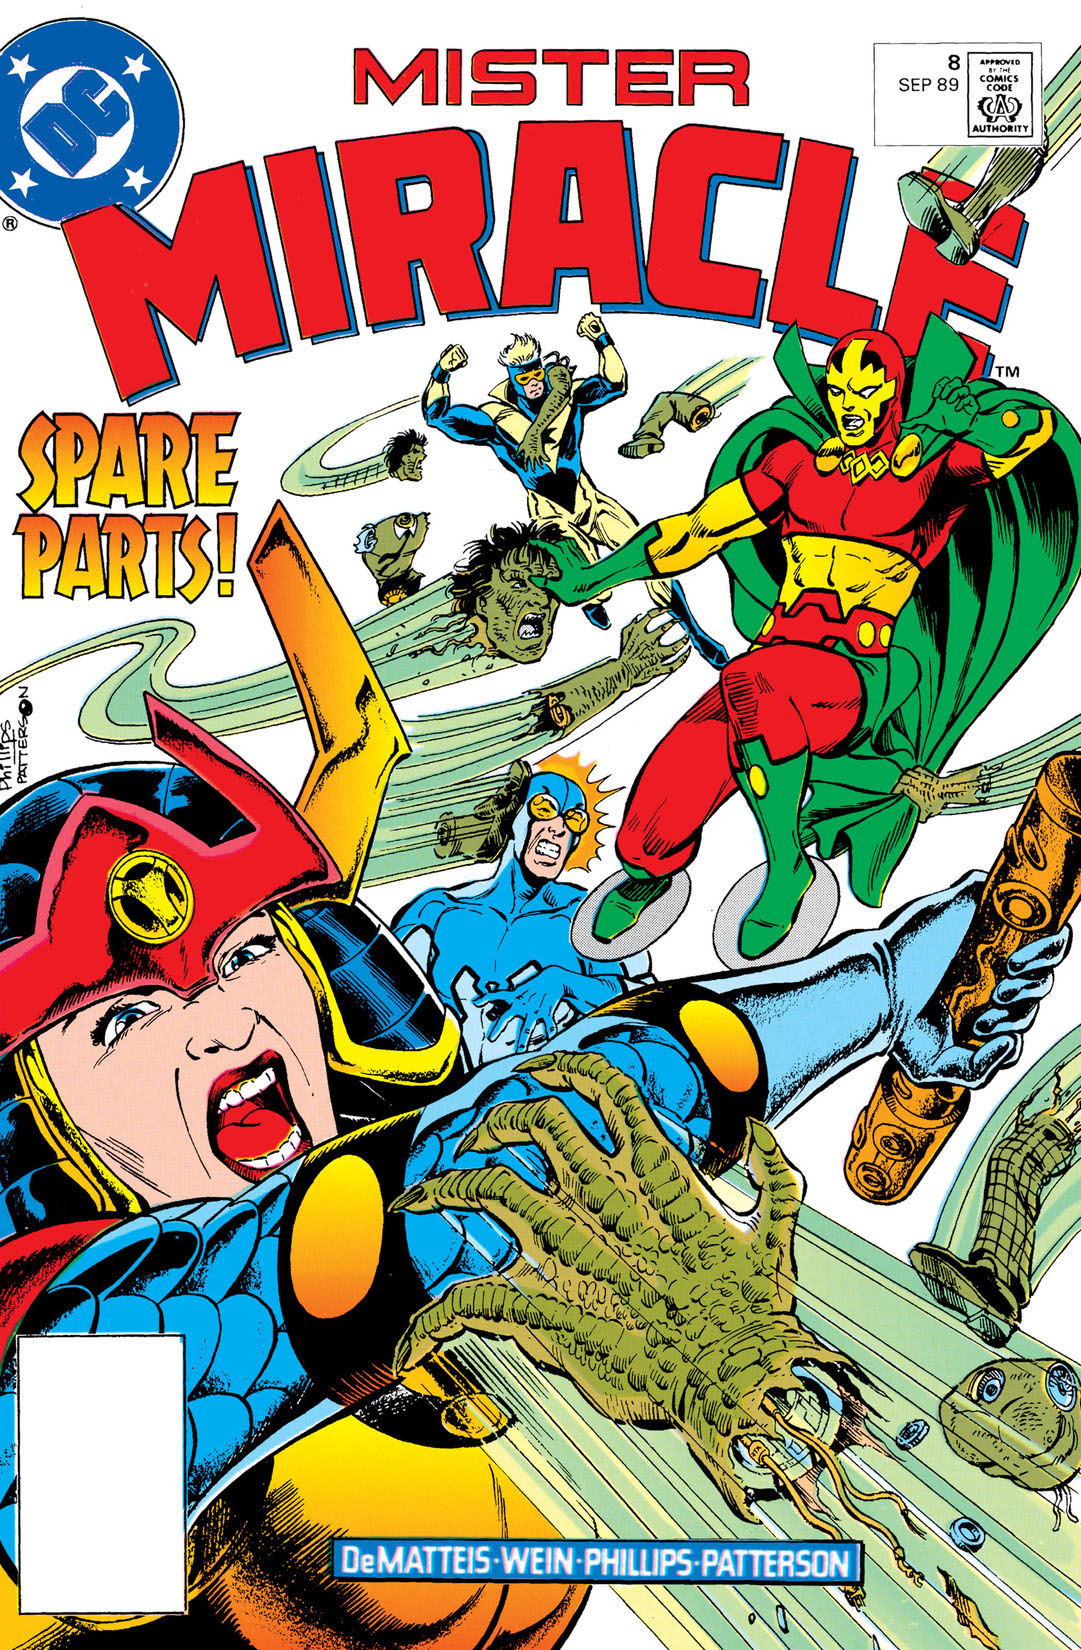 Mister Miracle (1988-) #8 preview images